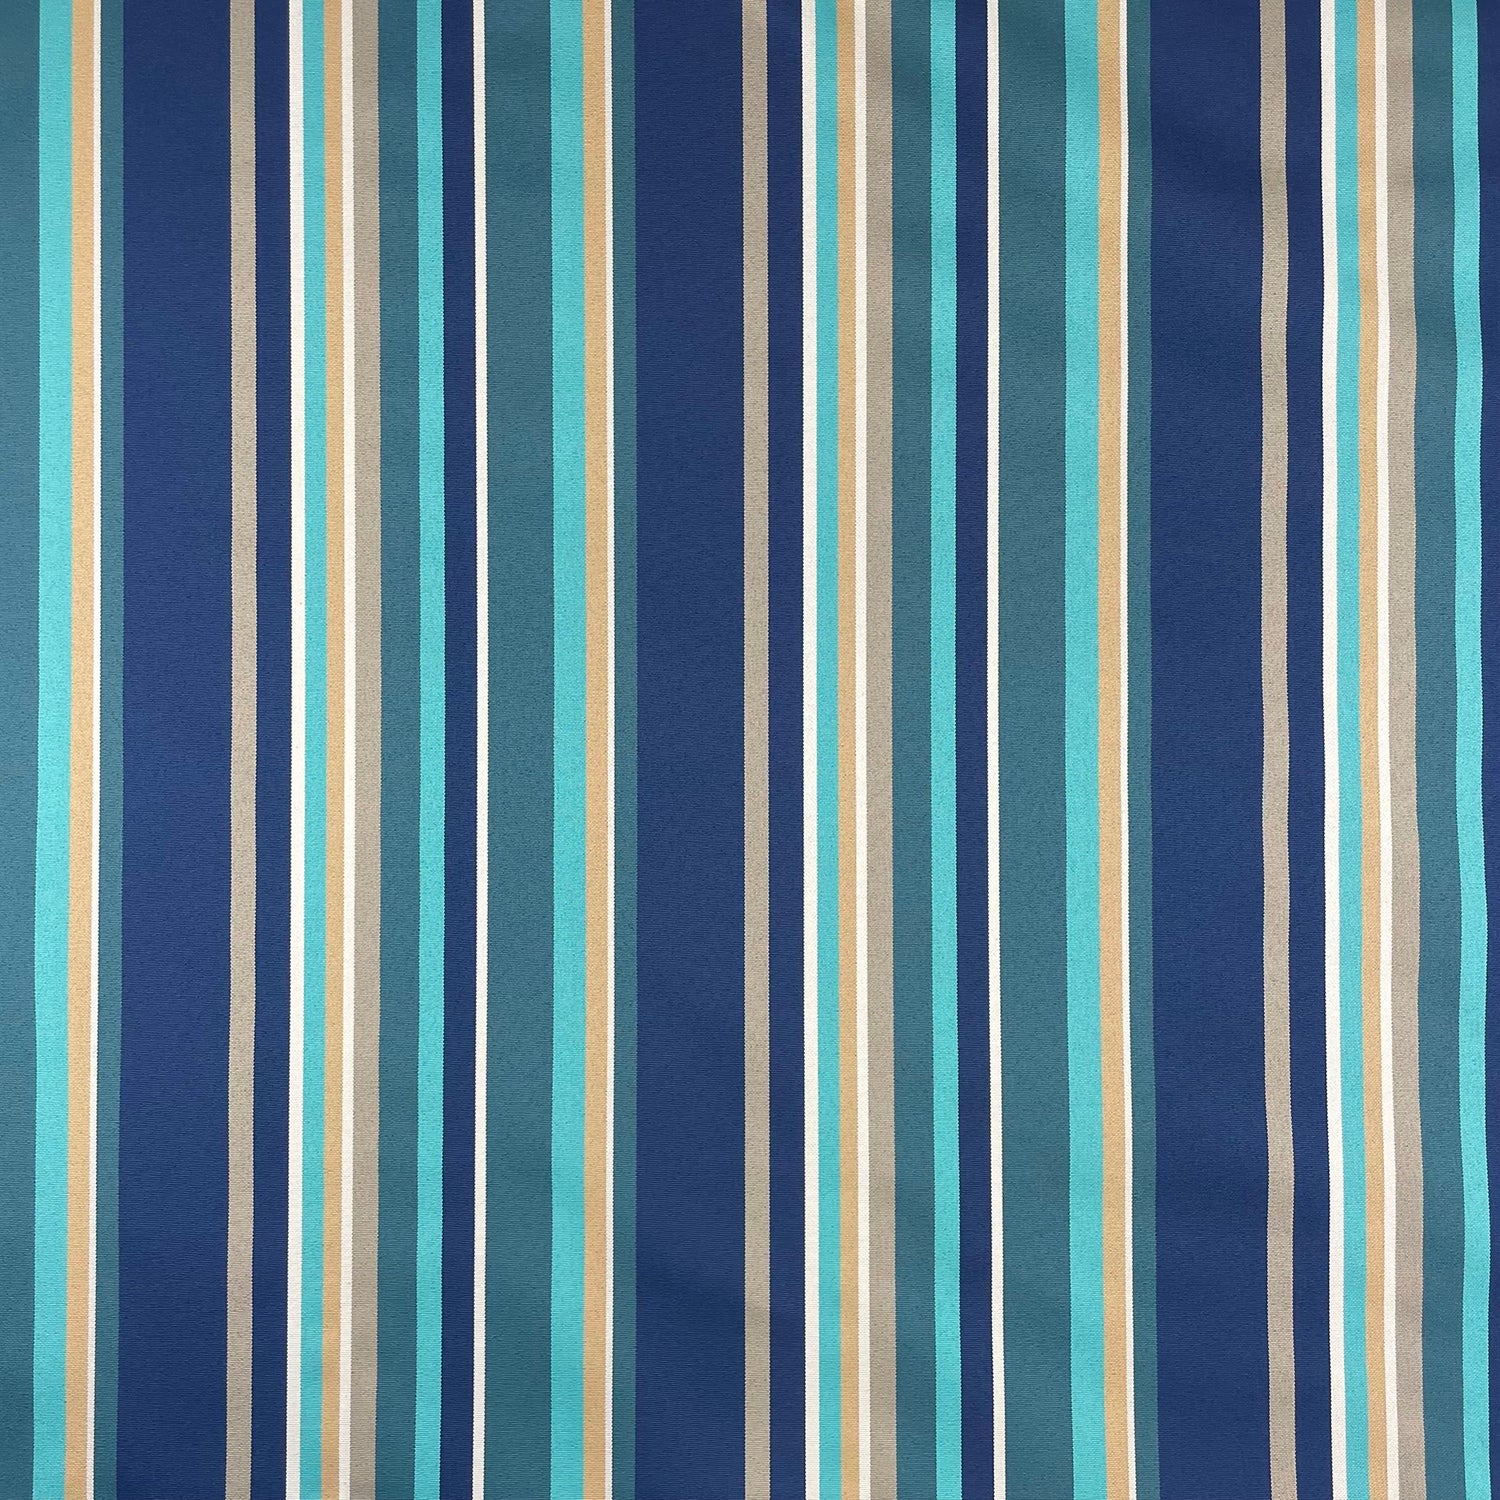 Whitley Bay Waterproof Outdoor Upholstery Fabric